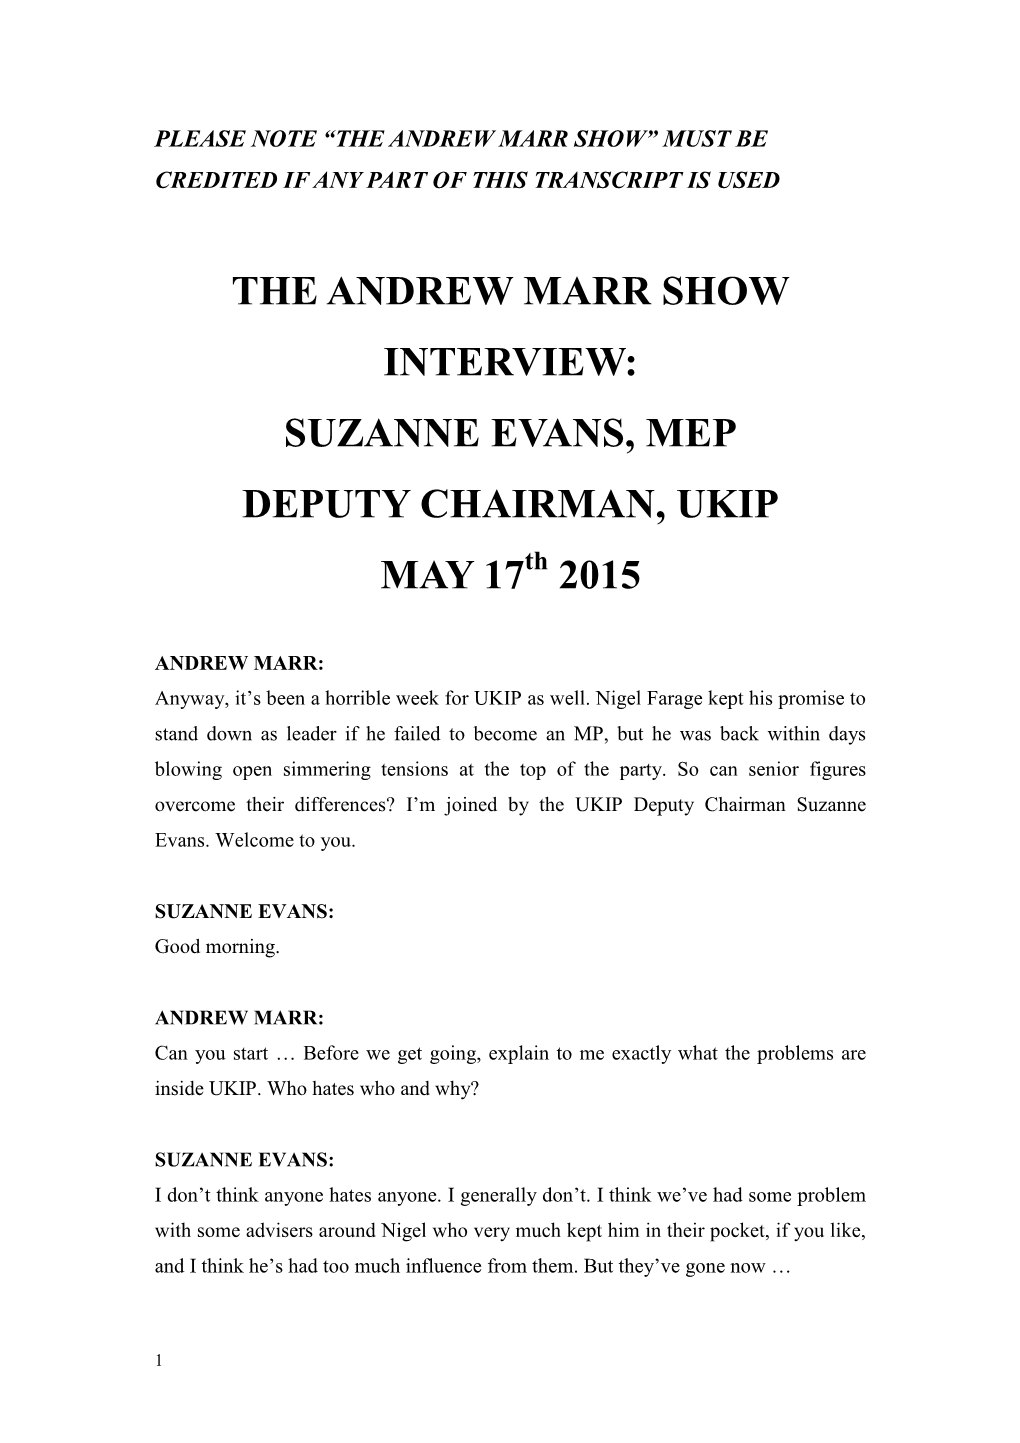 THE ANDREW MARR SHOW INTERVIEW: SUZANNE EVANS, MEP DEPUTY CHAIRMAN, UKIP MAY 17Th 2015